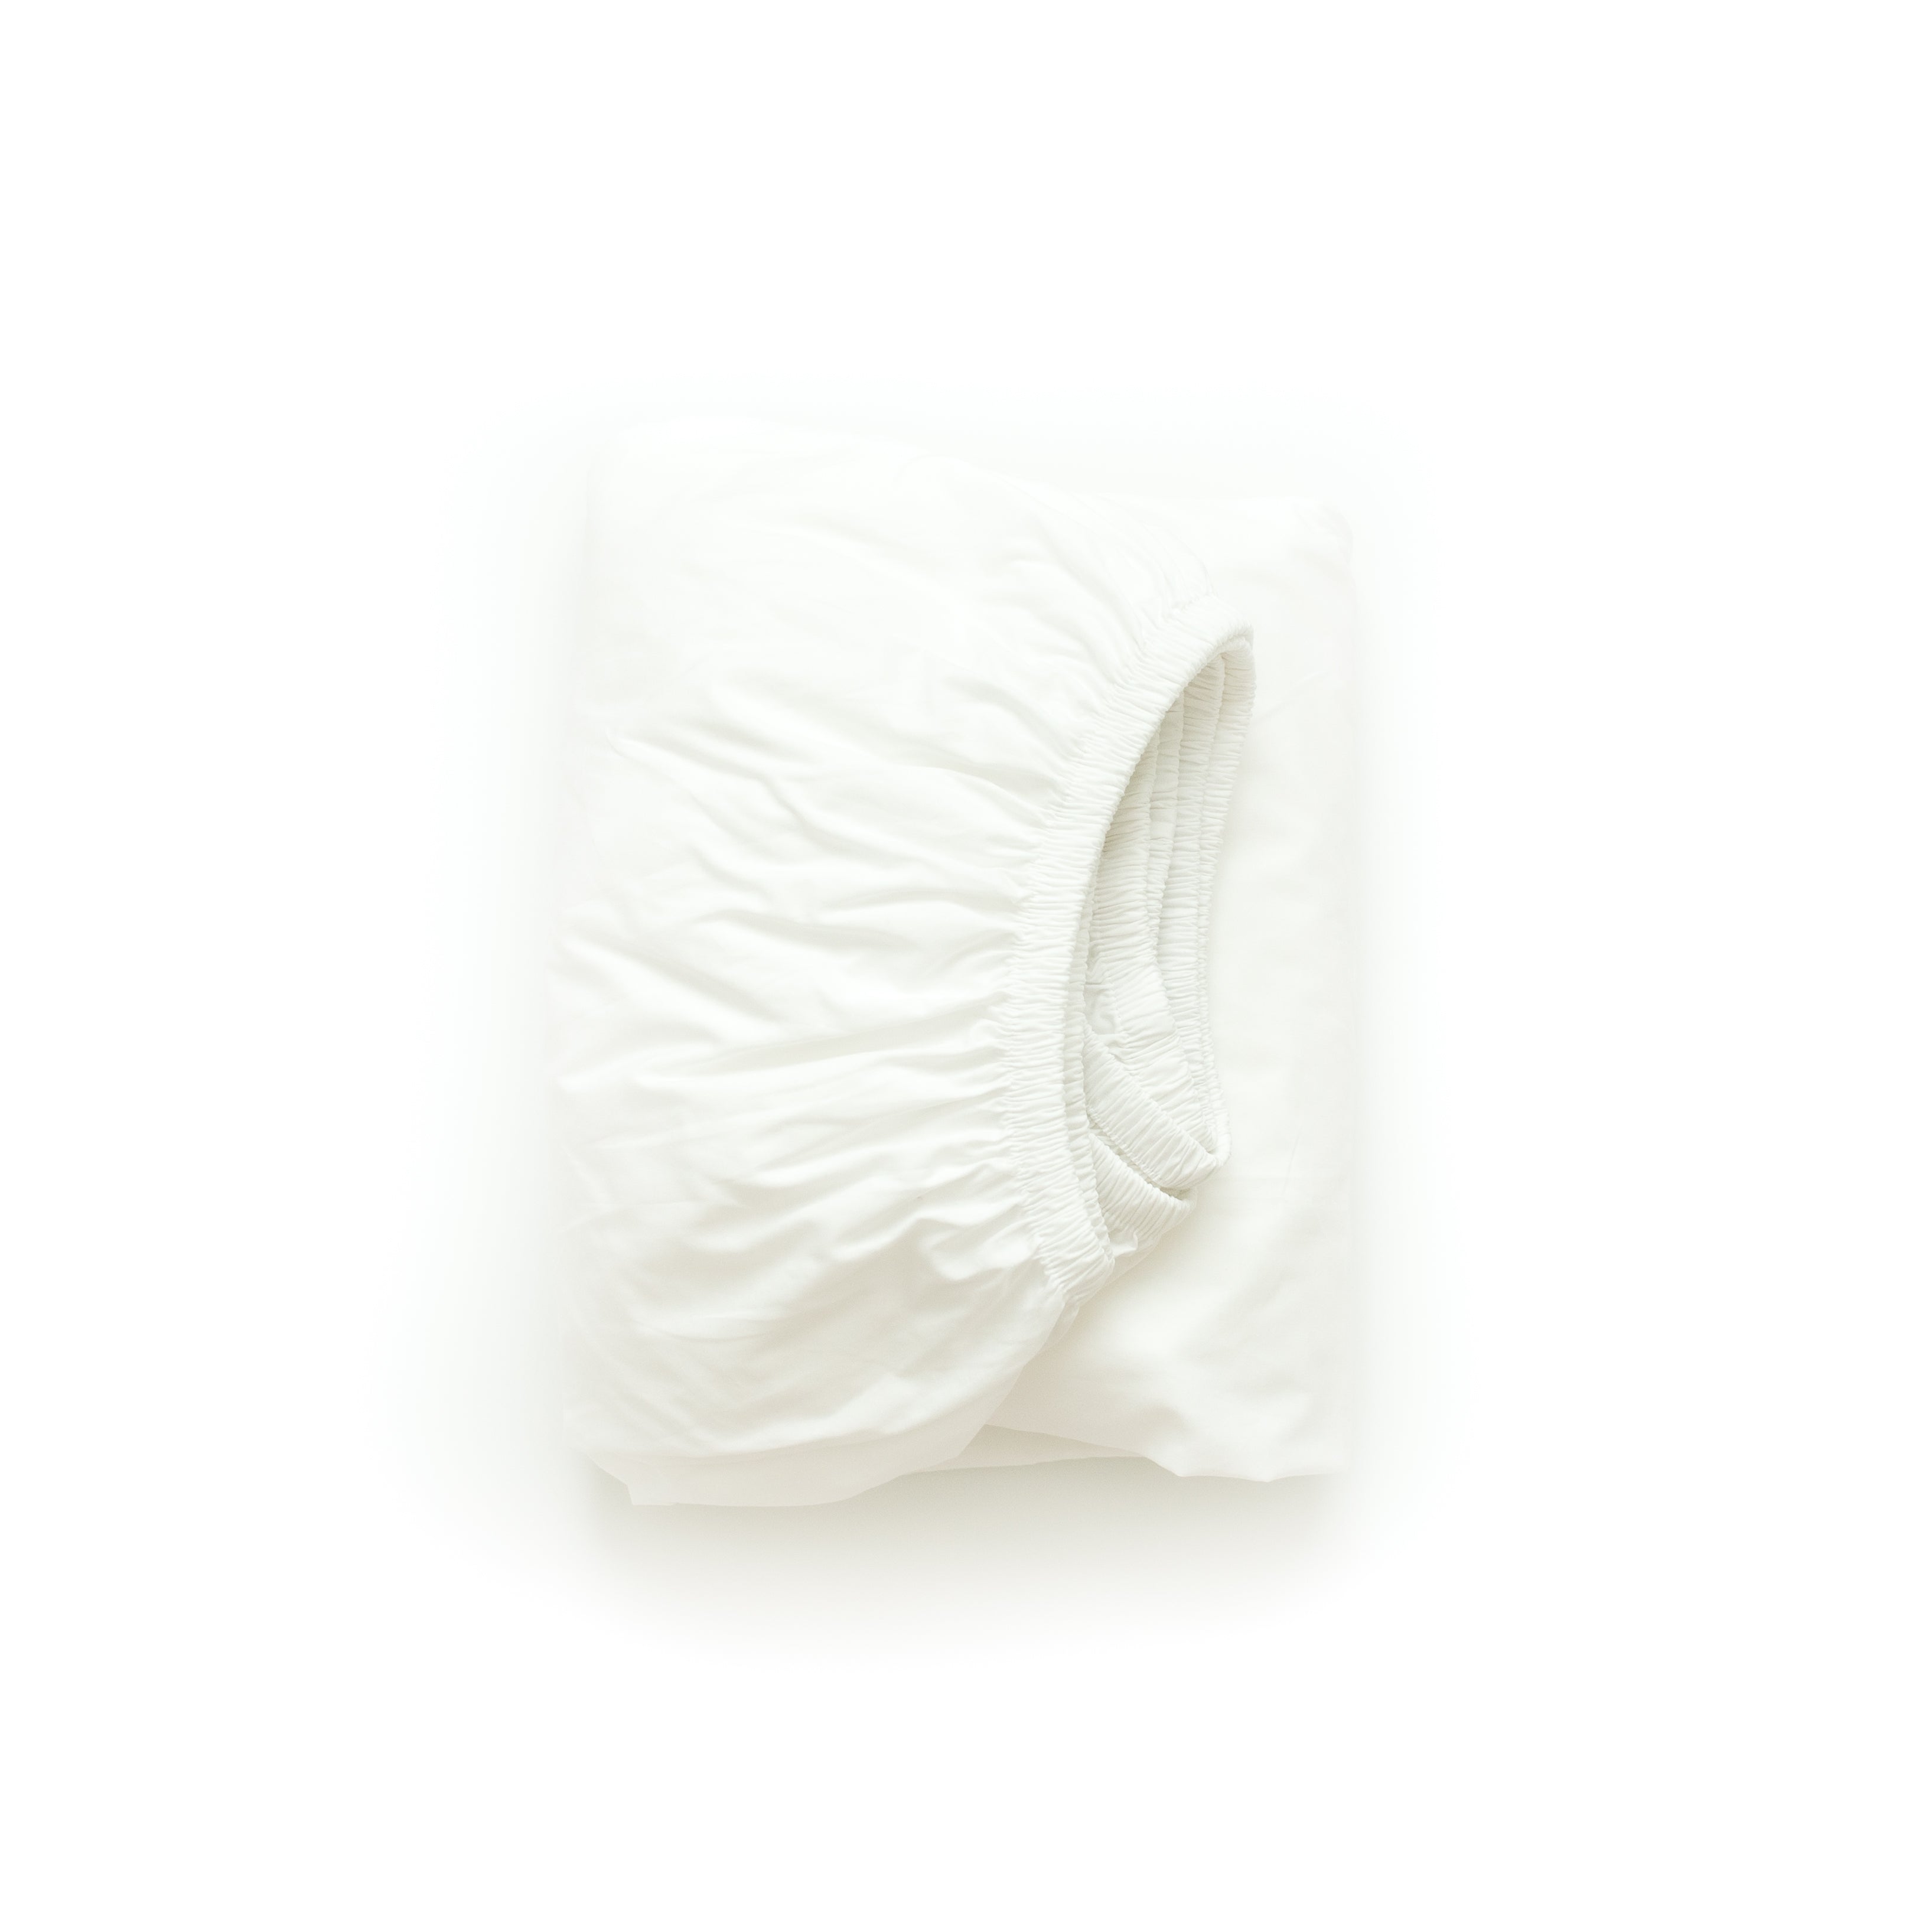 An Oolie organic cotton deep fitted sheet in white cotton, folded flat on a white background.